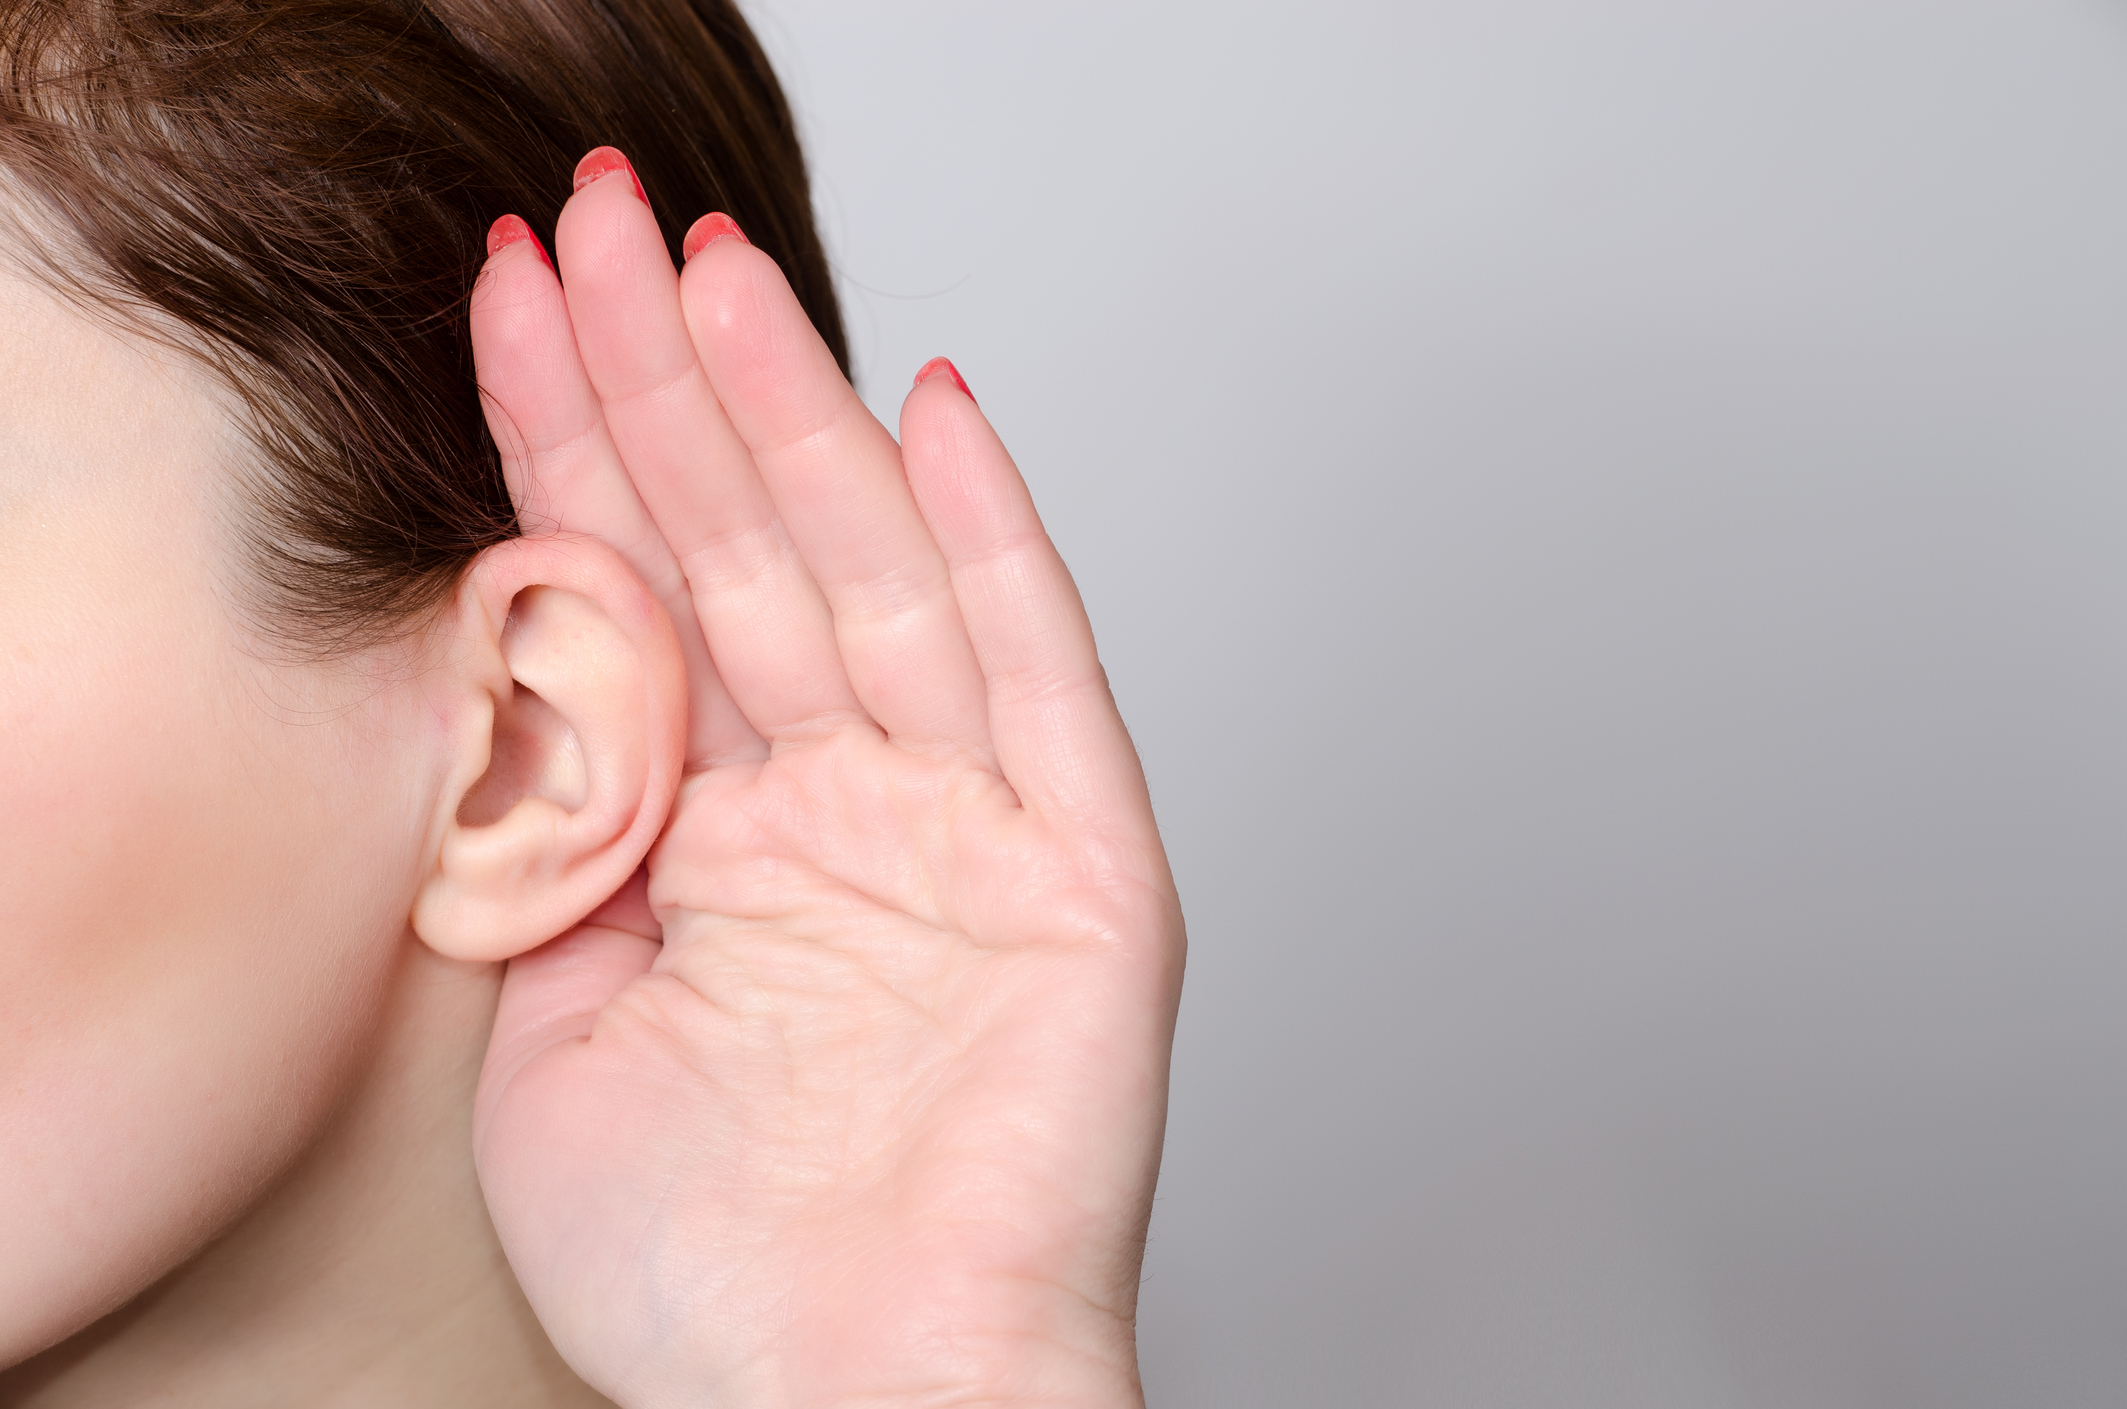 Person placing hand behind ear listening